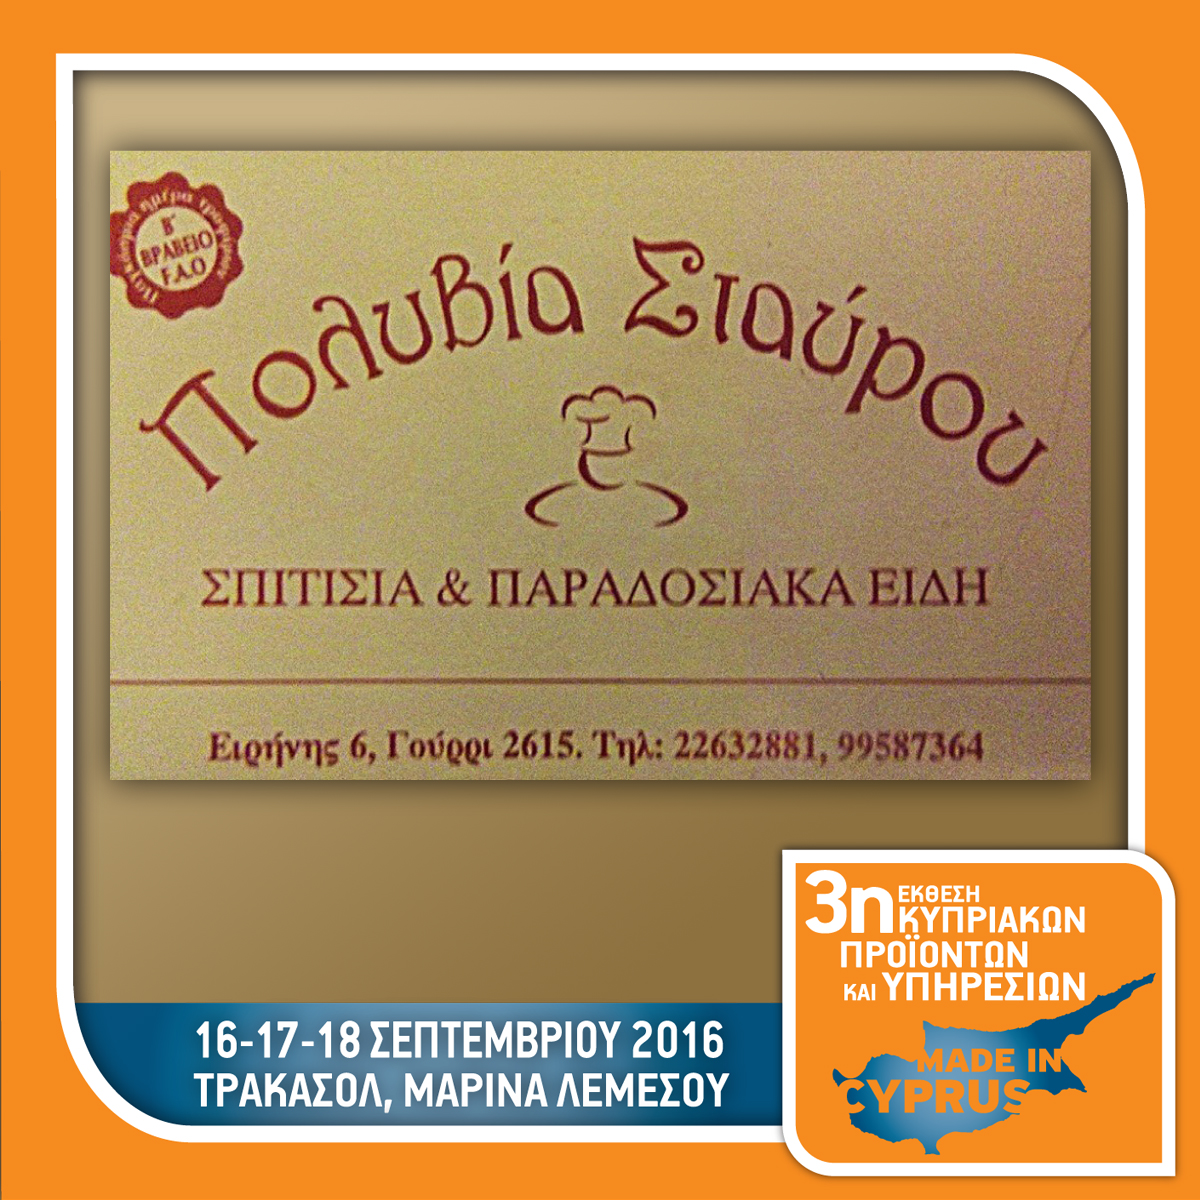 Polyvia Stavrou Traditional Food & Sweets - Stand No 49